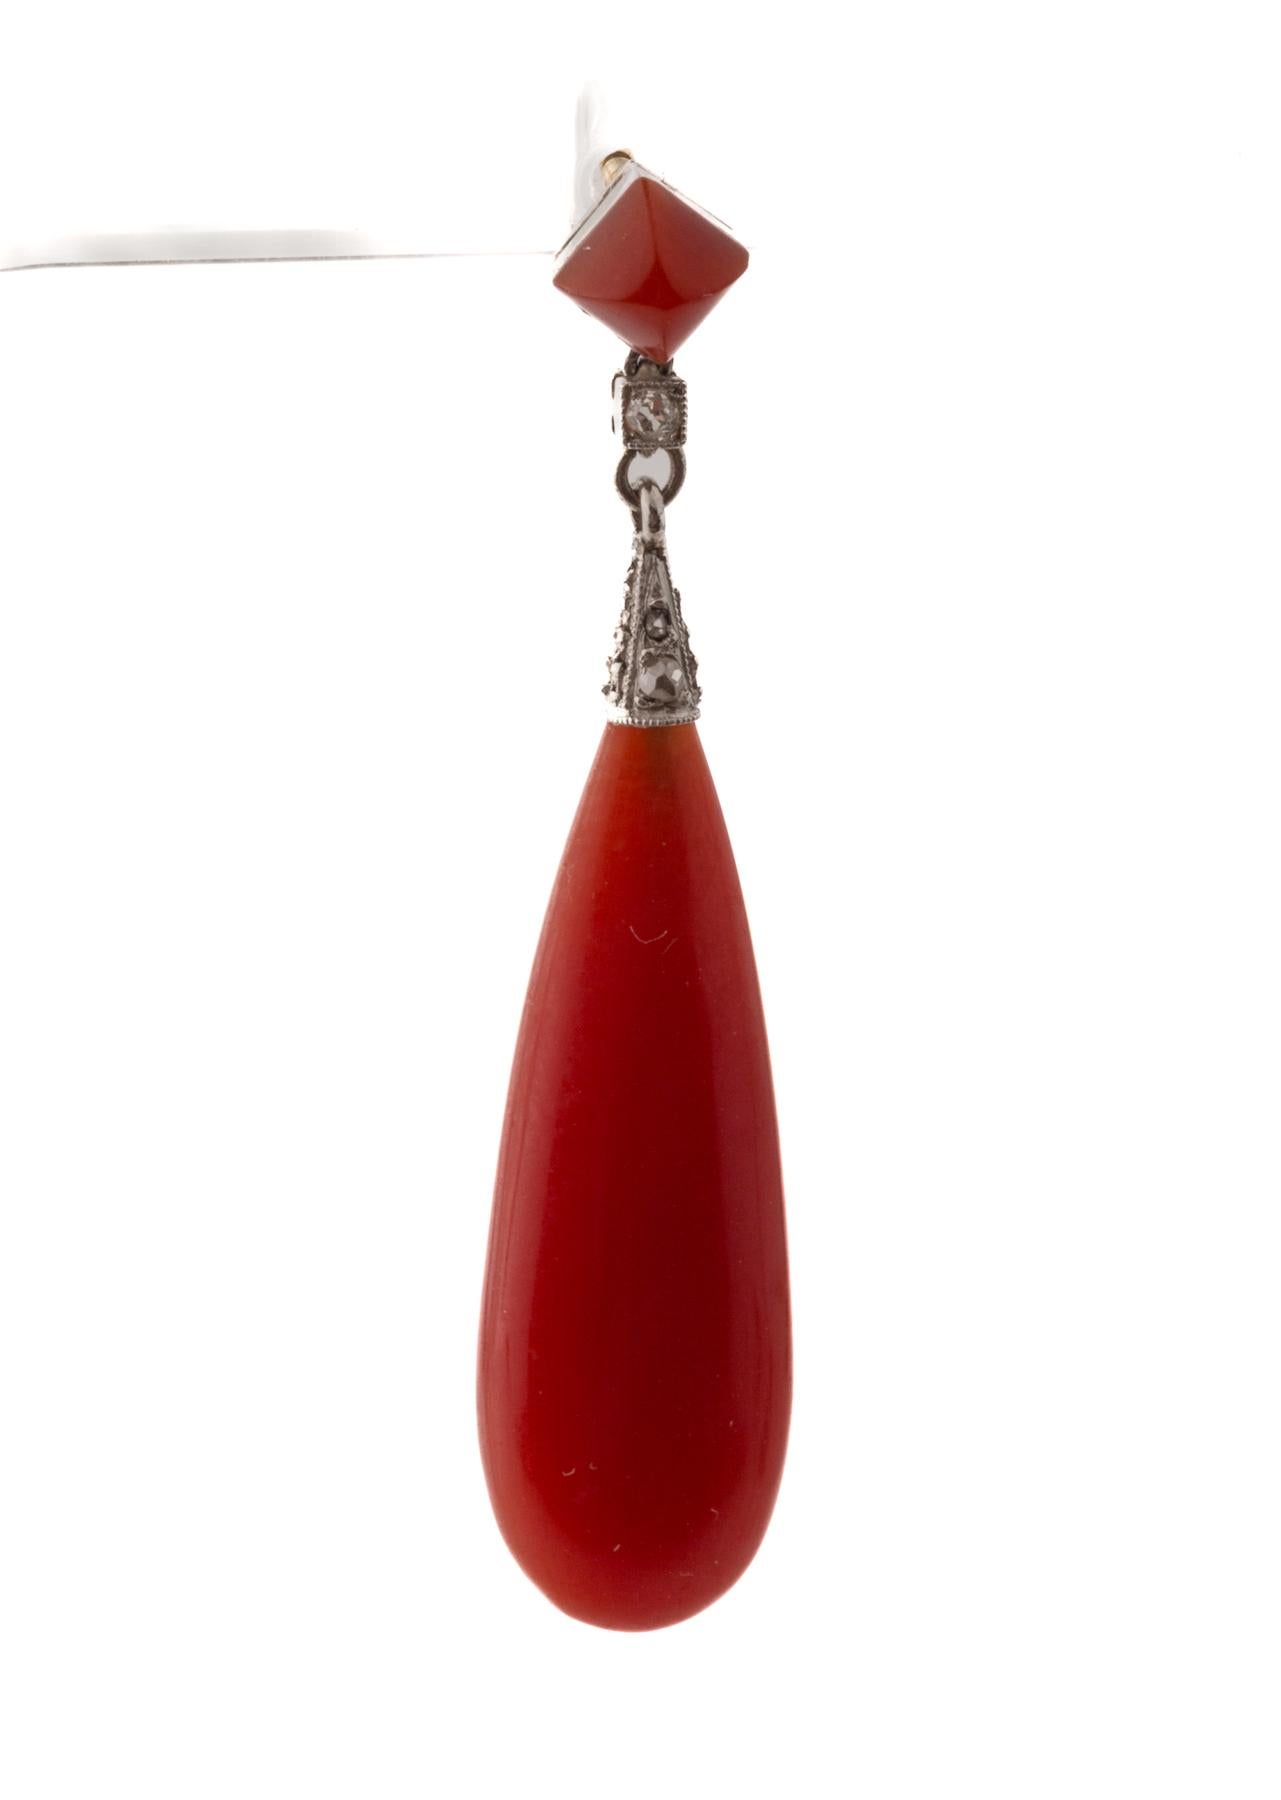 Light in weight and lush natural coral color these Art Deco earrings are a joyful addition to every wardrobe. Dating from c.1920 they have timeless beauty. Smooth coral in a teardrop have the sparkle of small diamonds at the top. From your office to